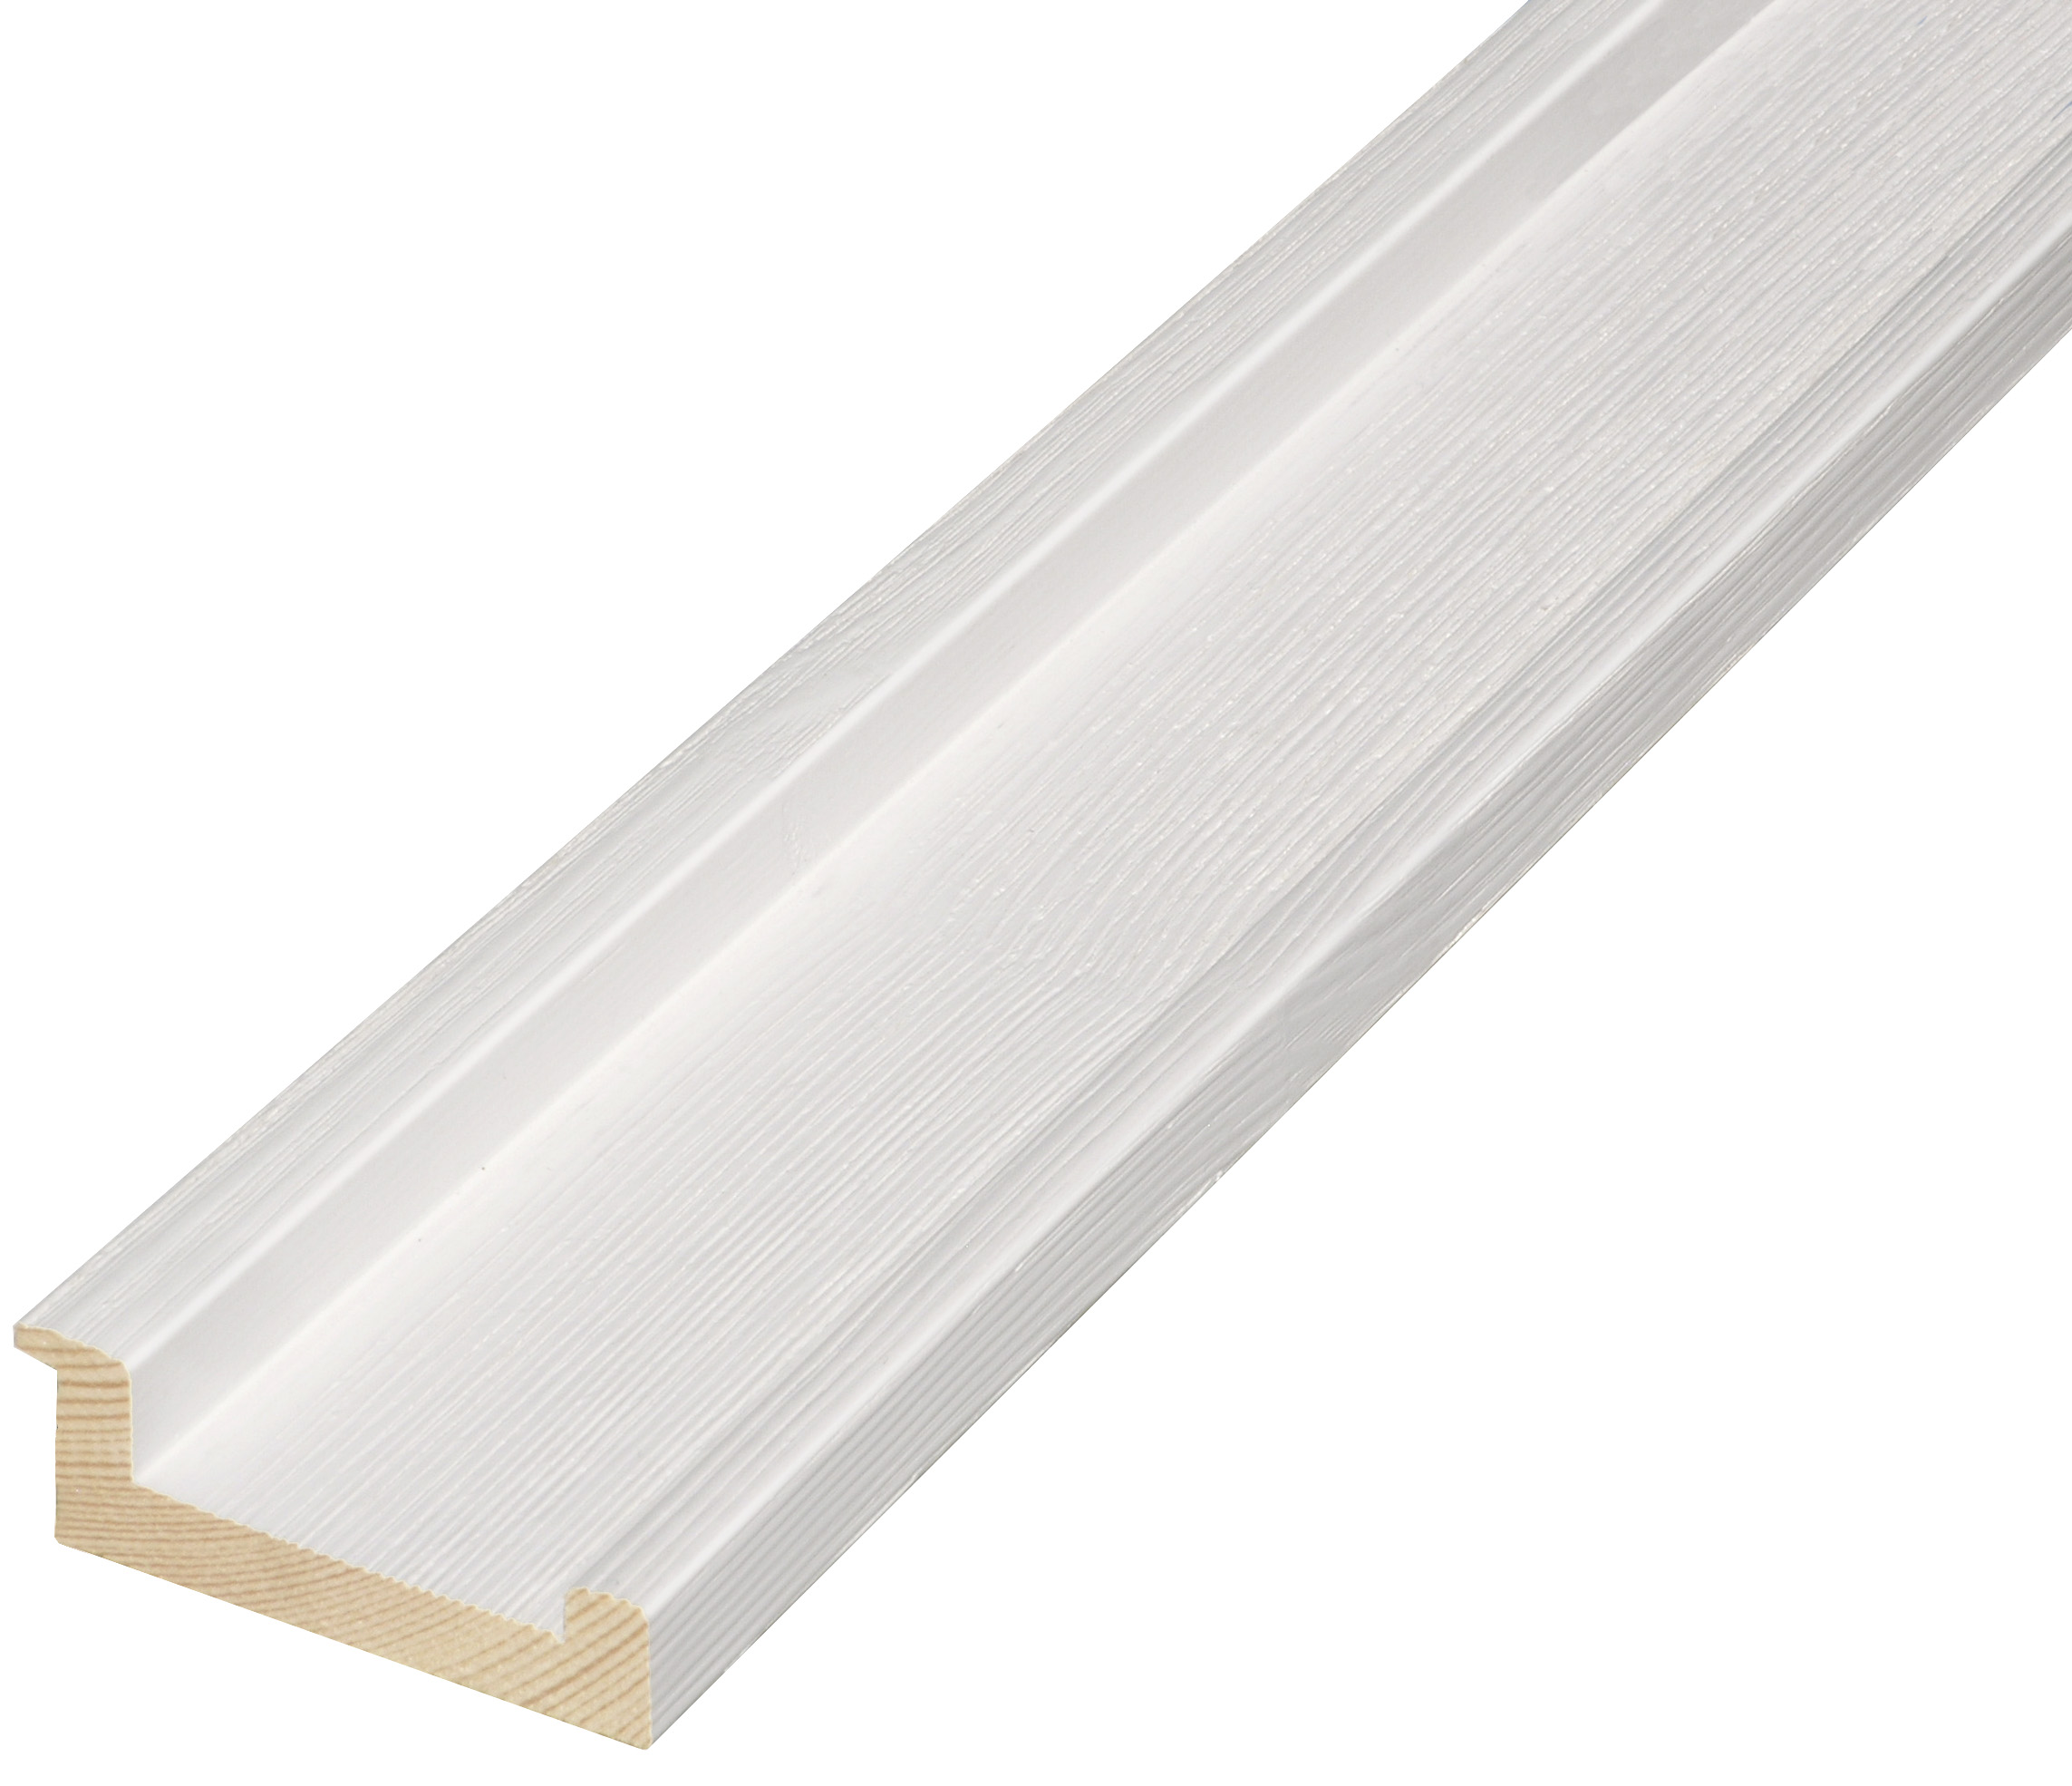 Moulding finger-jointed pine width 68mm Height 20, white finish - 571BIANCO